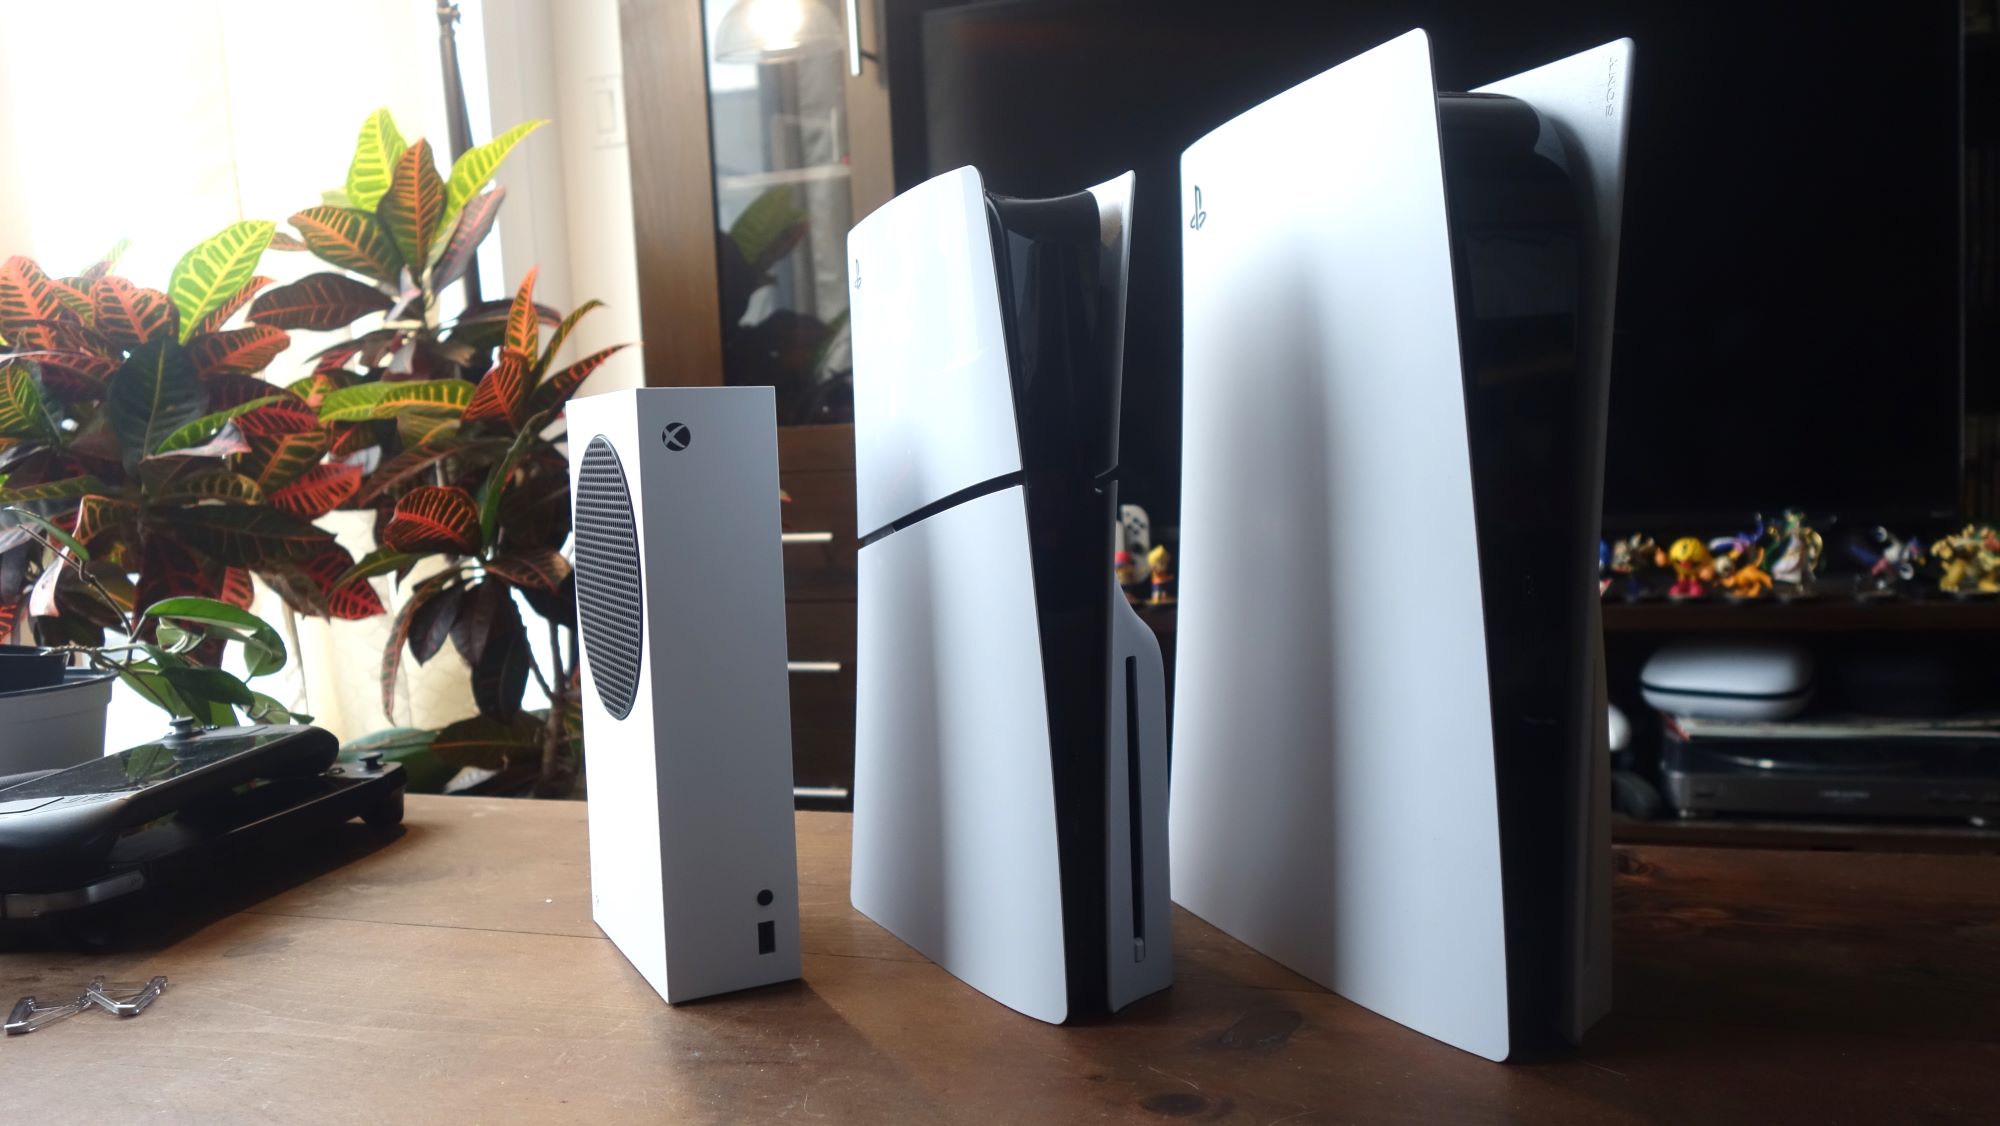 An Xbox Series S, PS5 Slim, and PS5 stand next to one another.